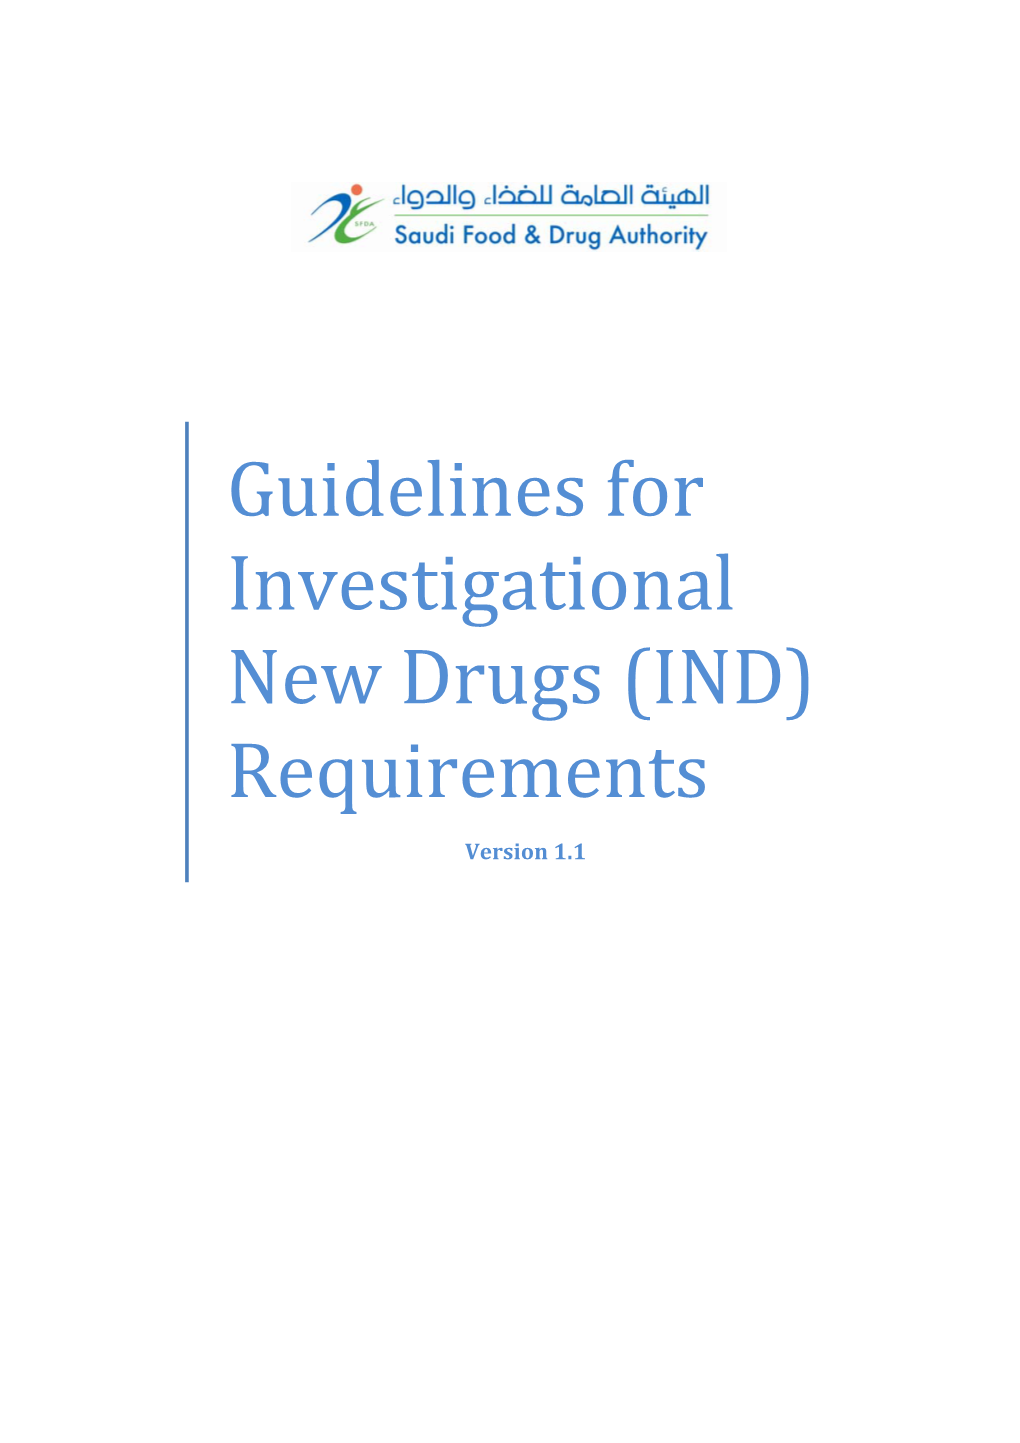 Guidelines for Investigational New Drugs (IND) Requirements